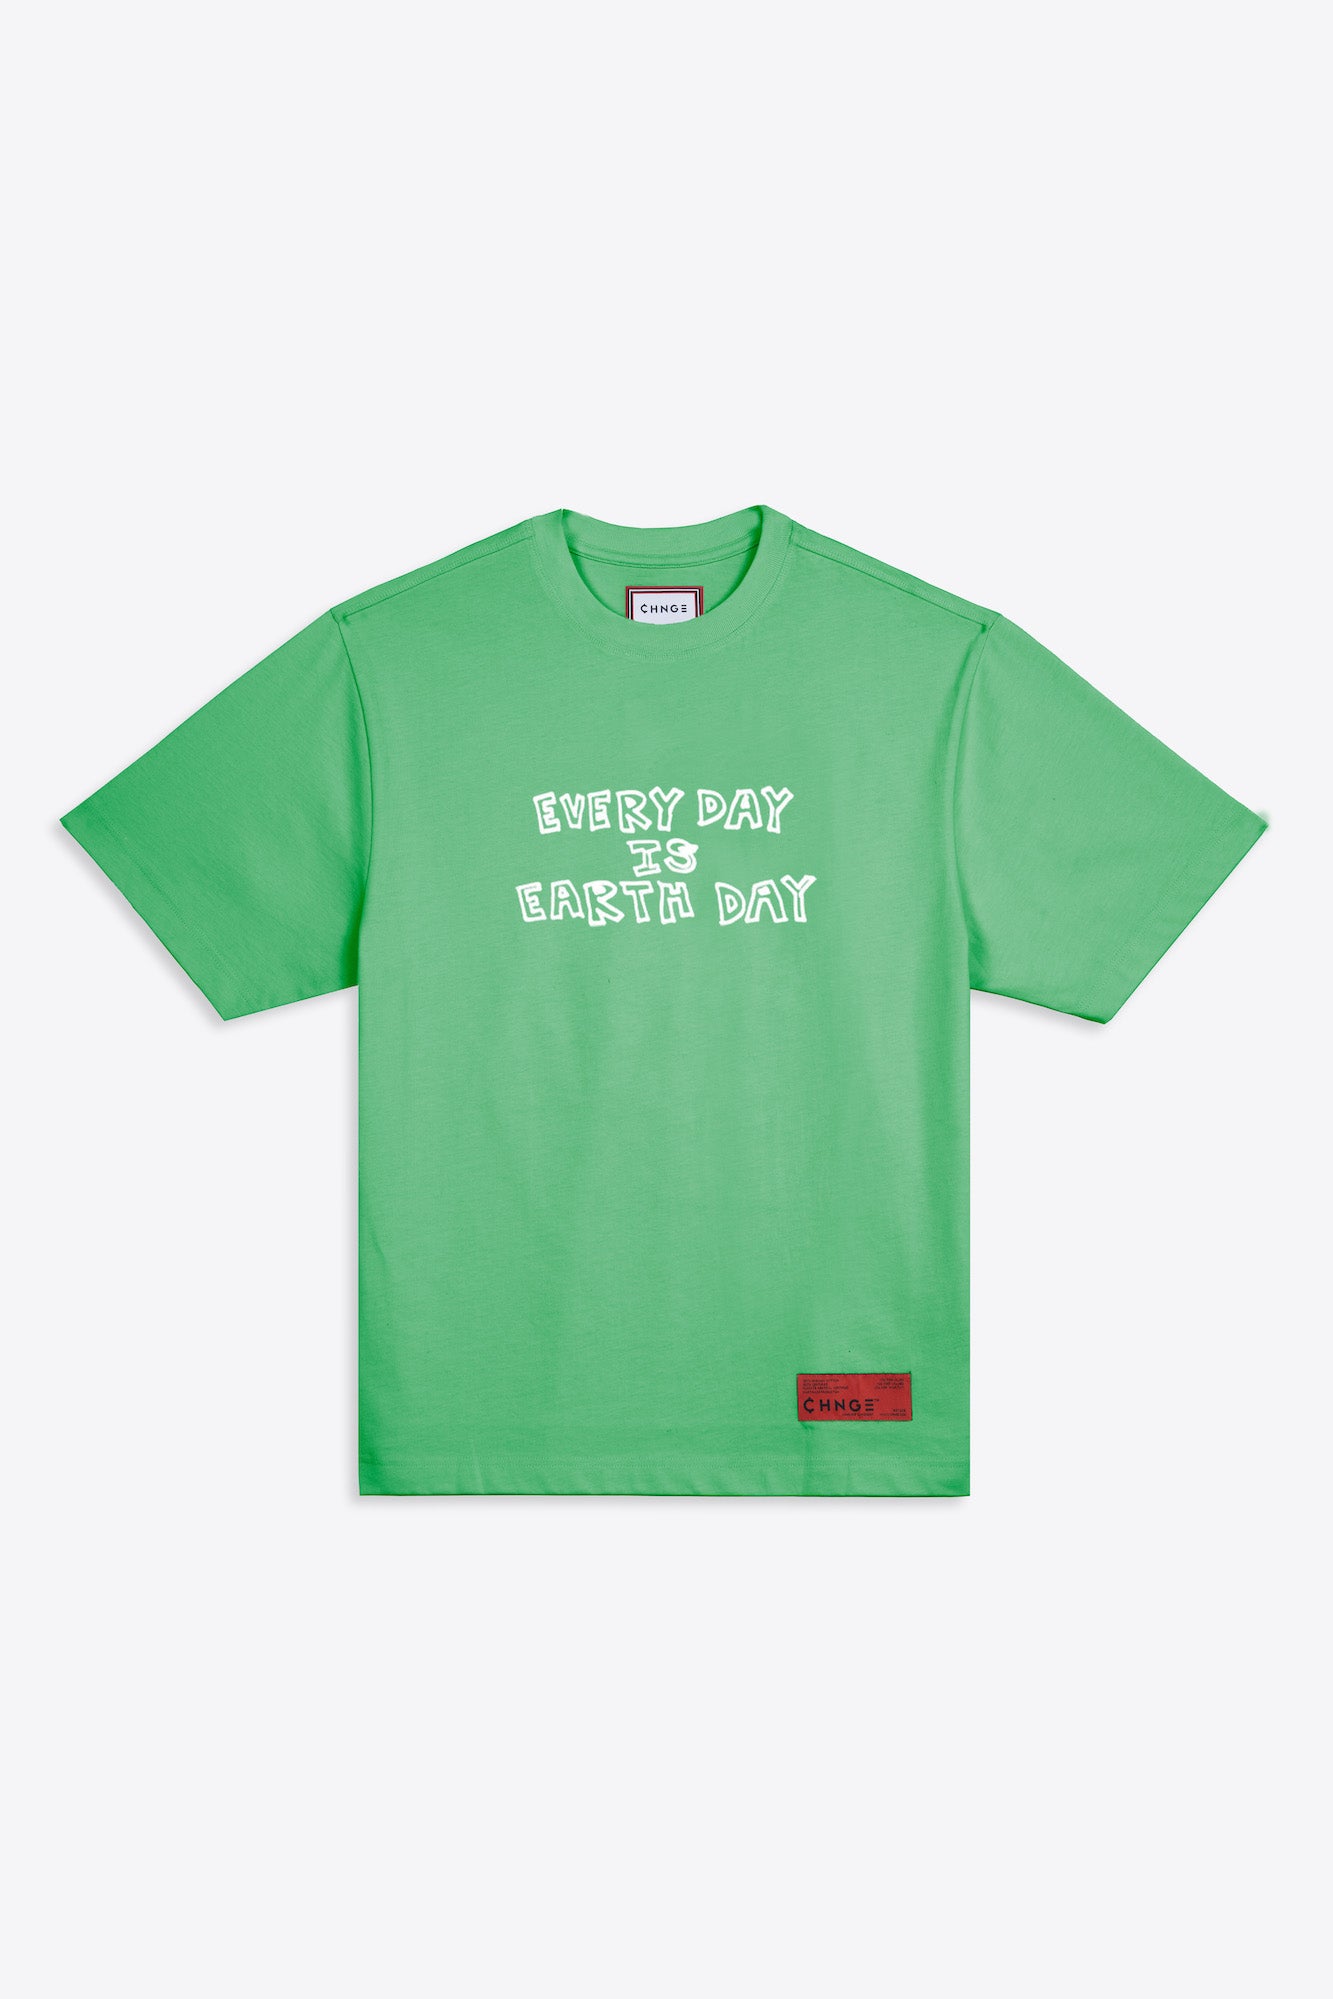 Every Day Earth Day S/S Green) $42 (Kelly T-Shirt